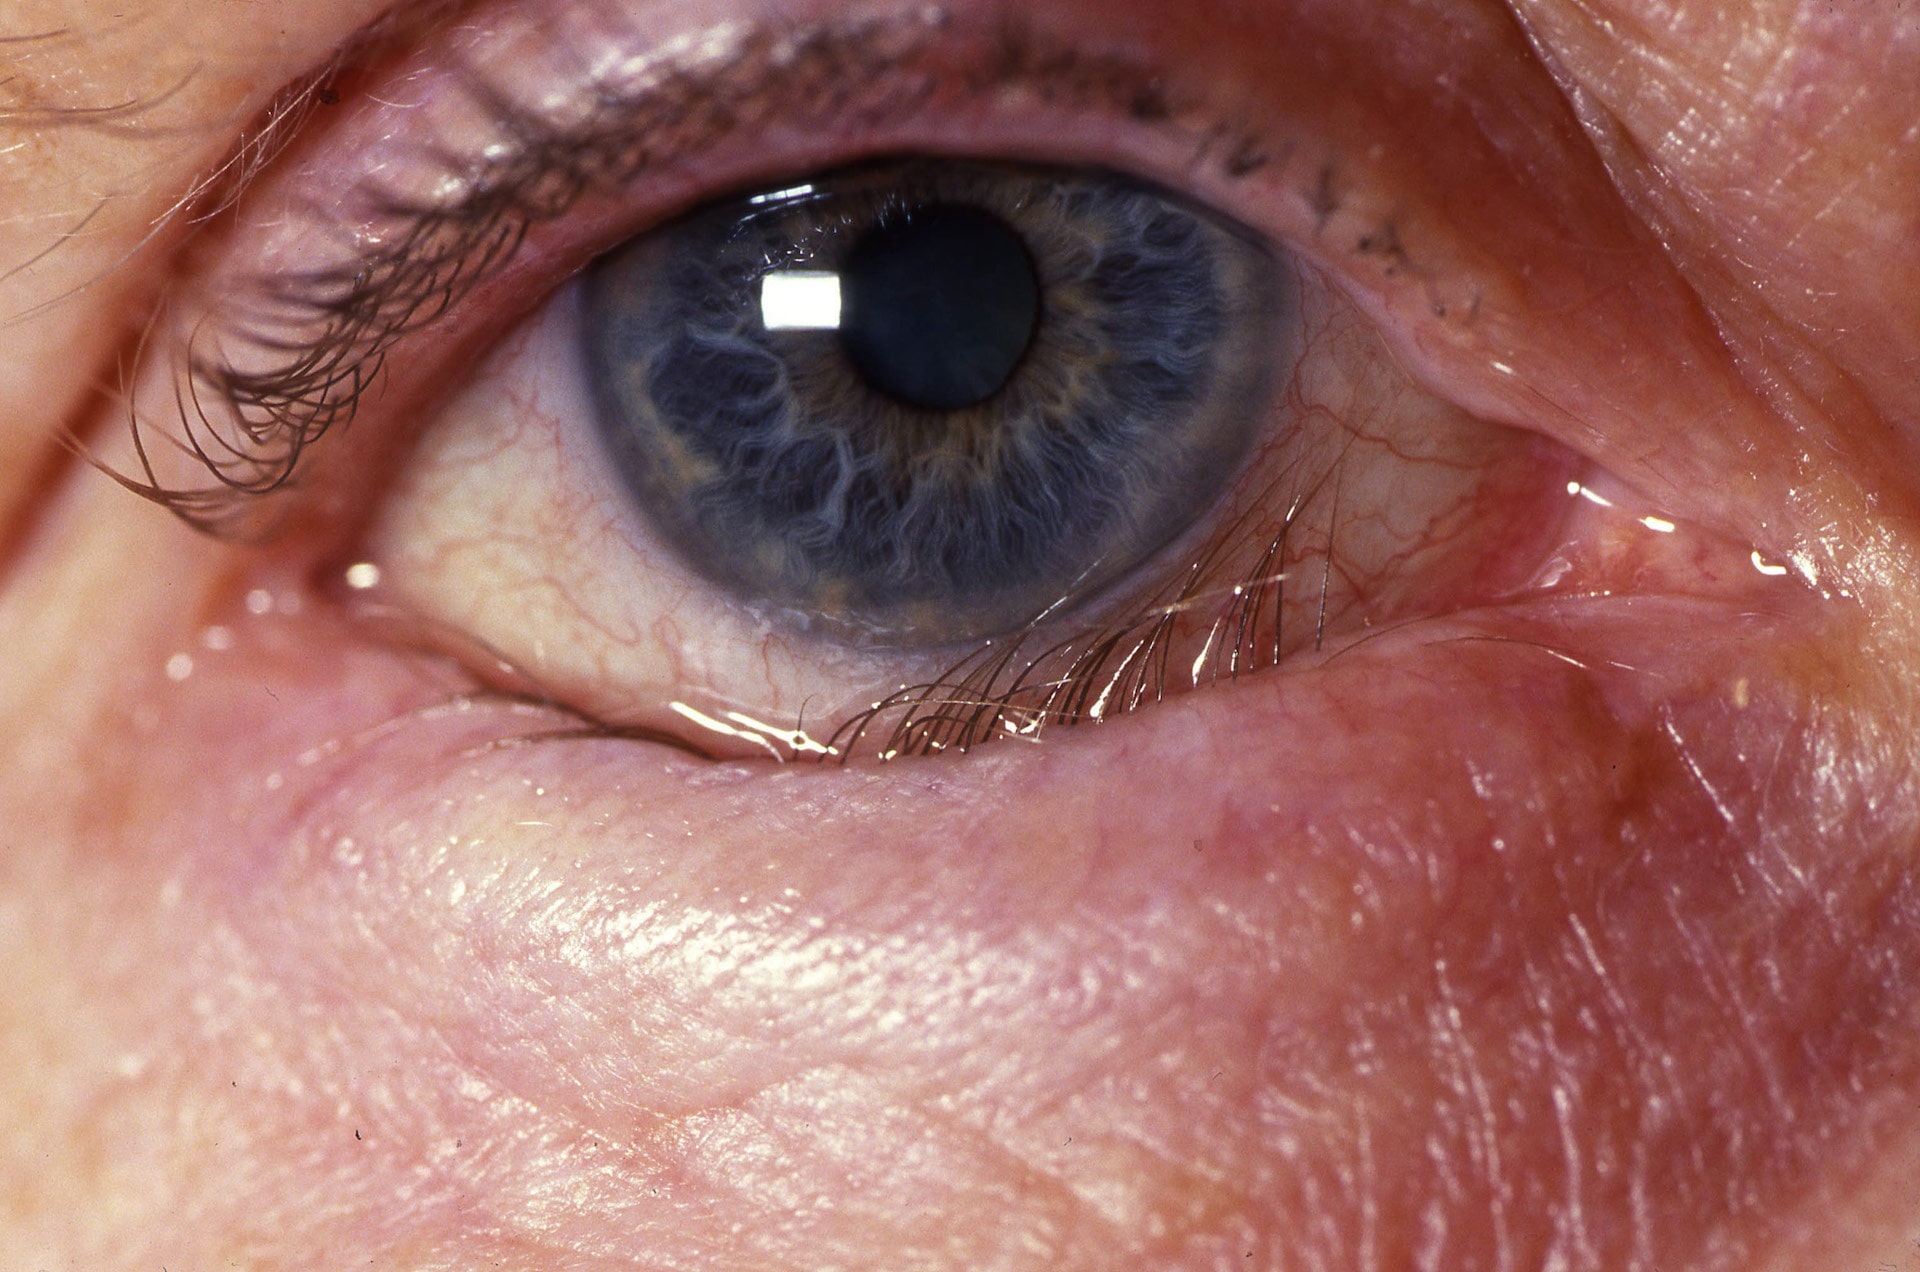 close up image of a person's eye